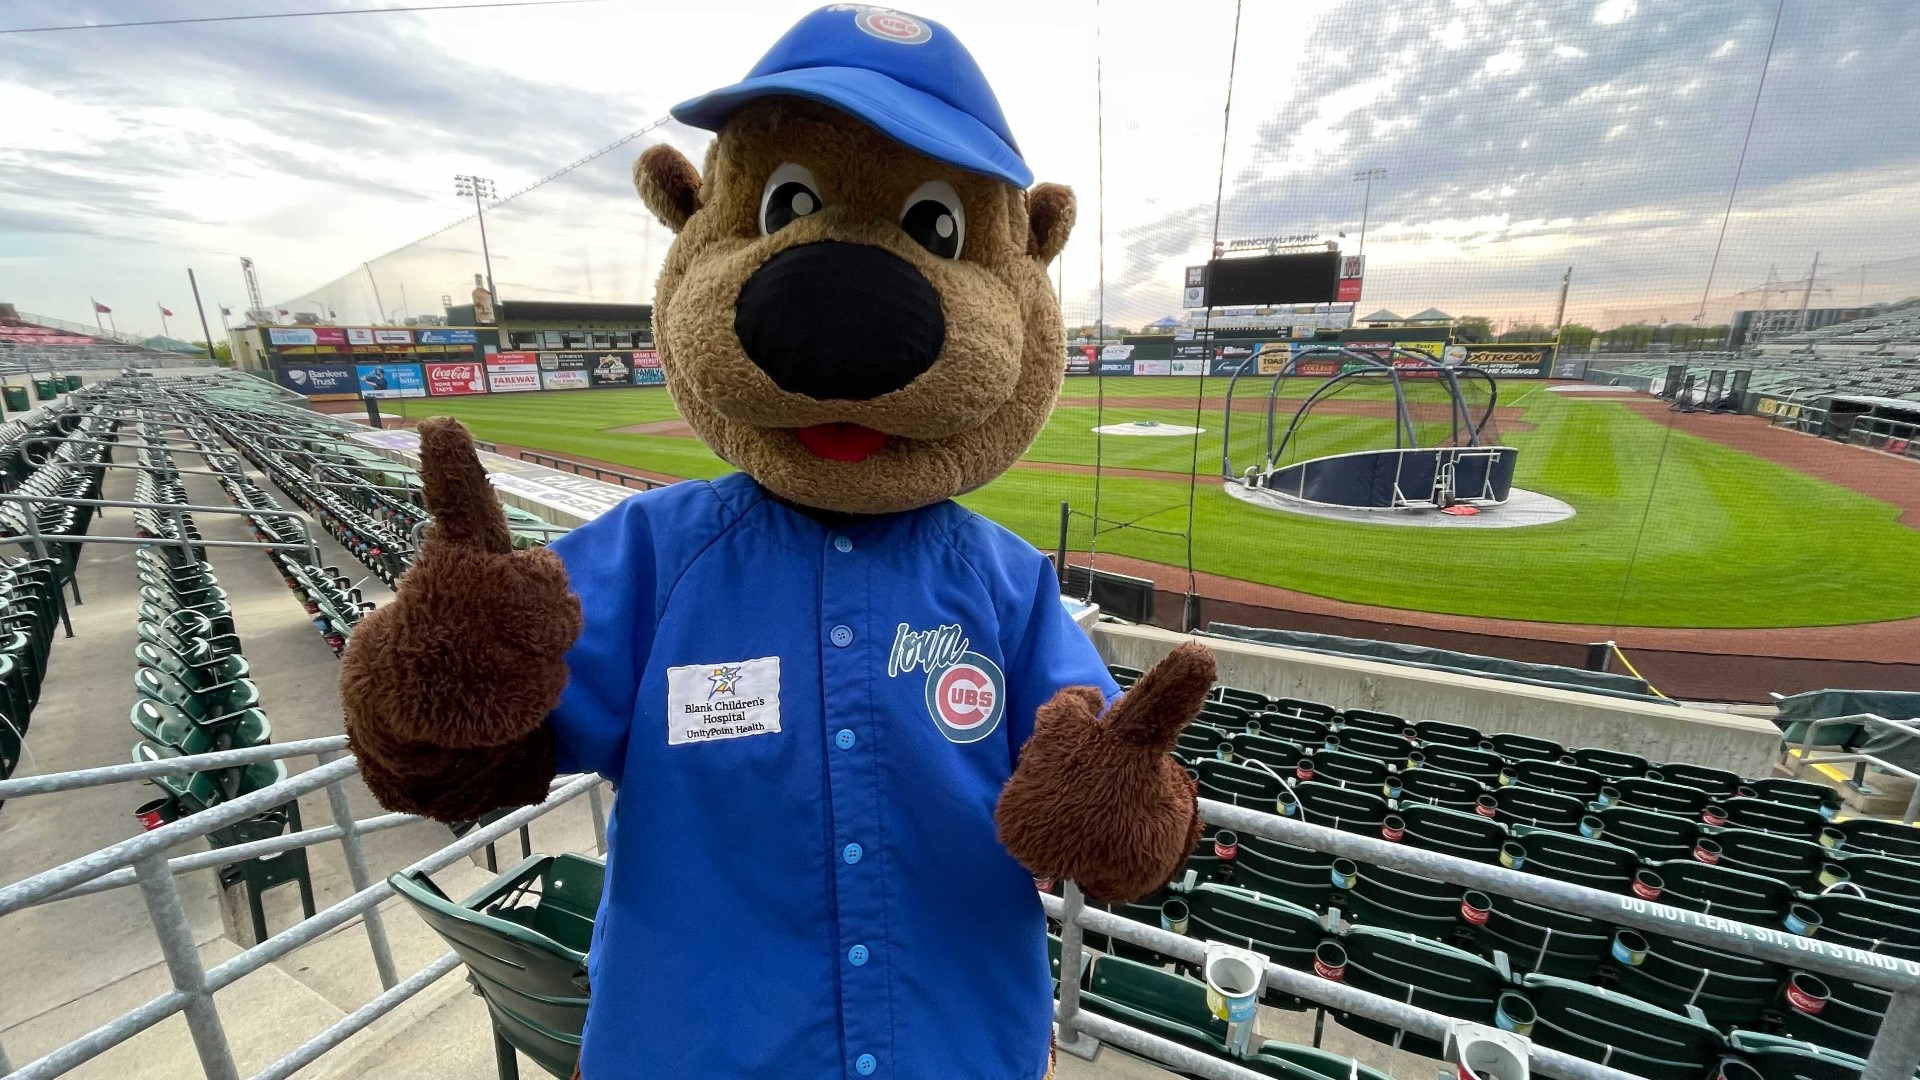 Iowa Cubs - Cubbie's birthday is ONE WEEK from today 🎉 🎉 Come celebrate  the best mascot in baseball on Thursday, August 26 as Cubbie brings his  mascot friends out for an